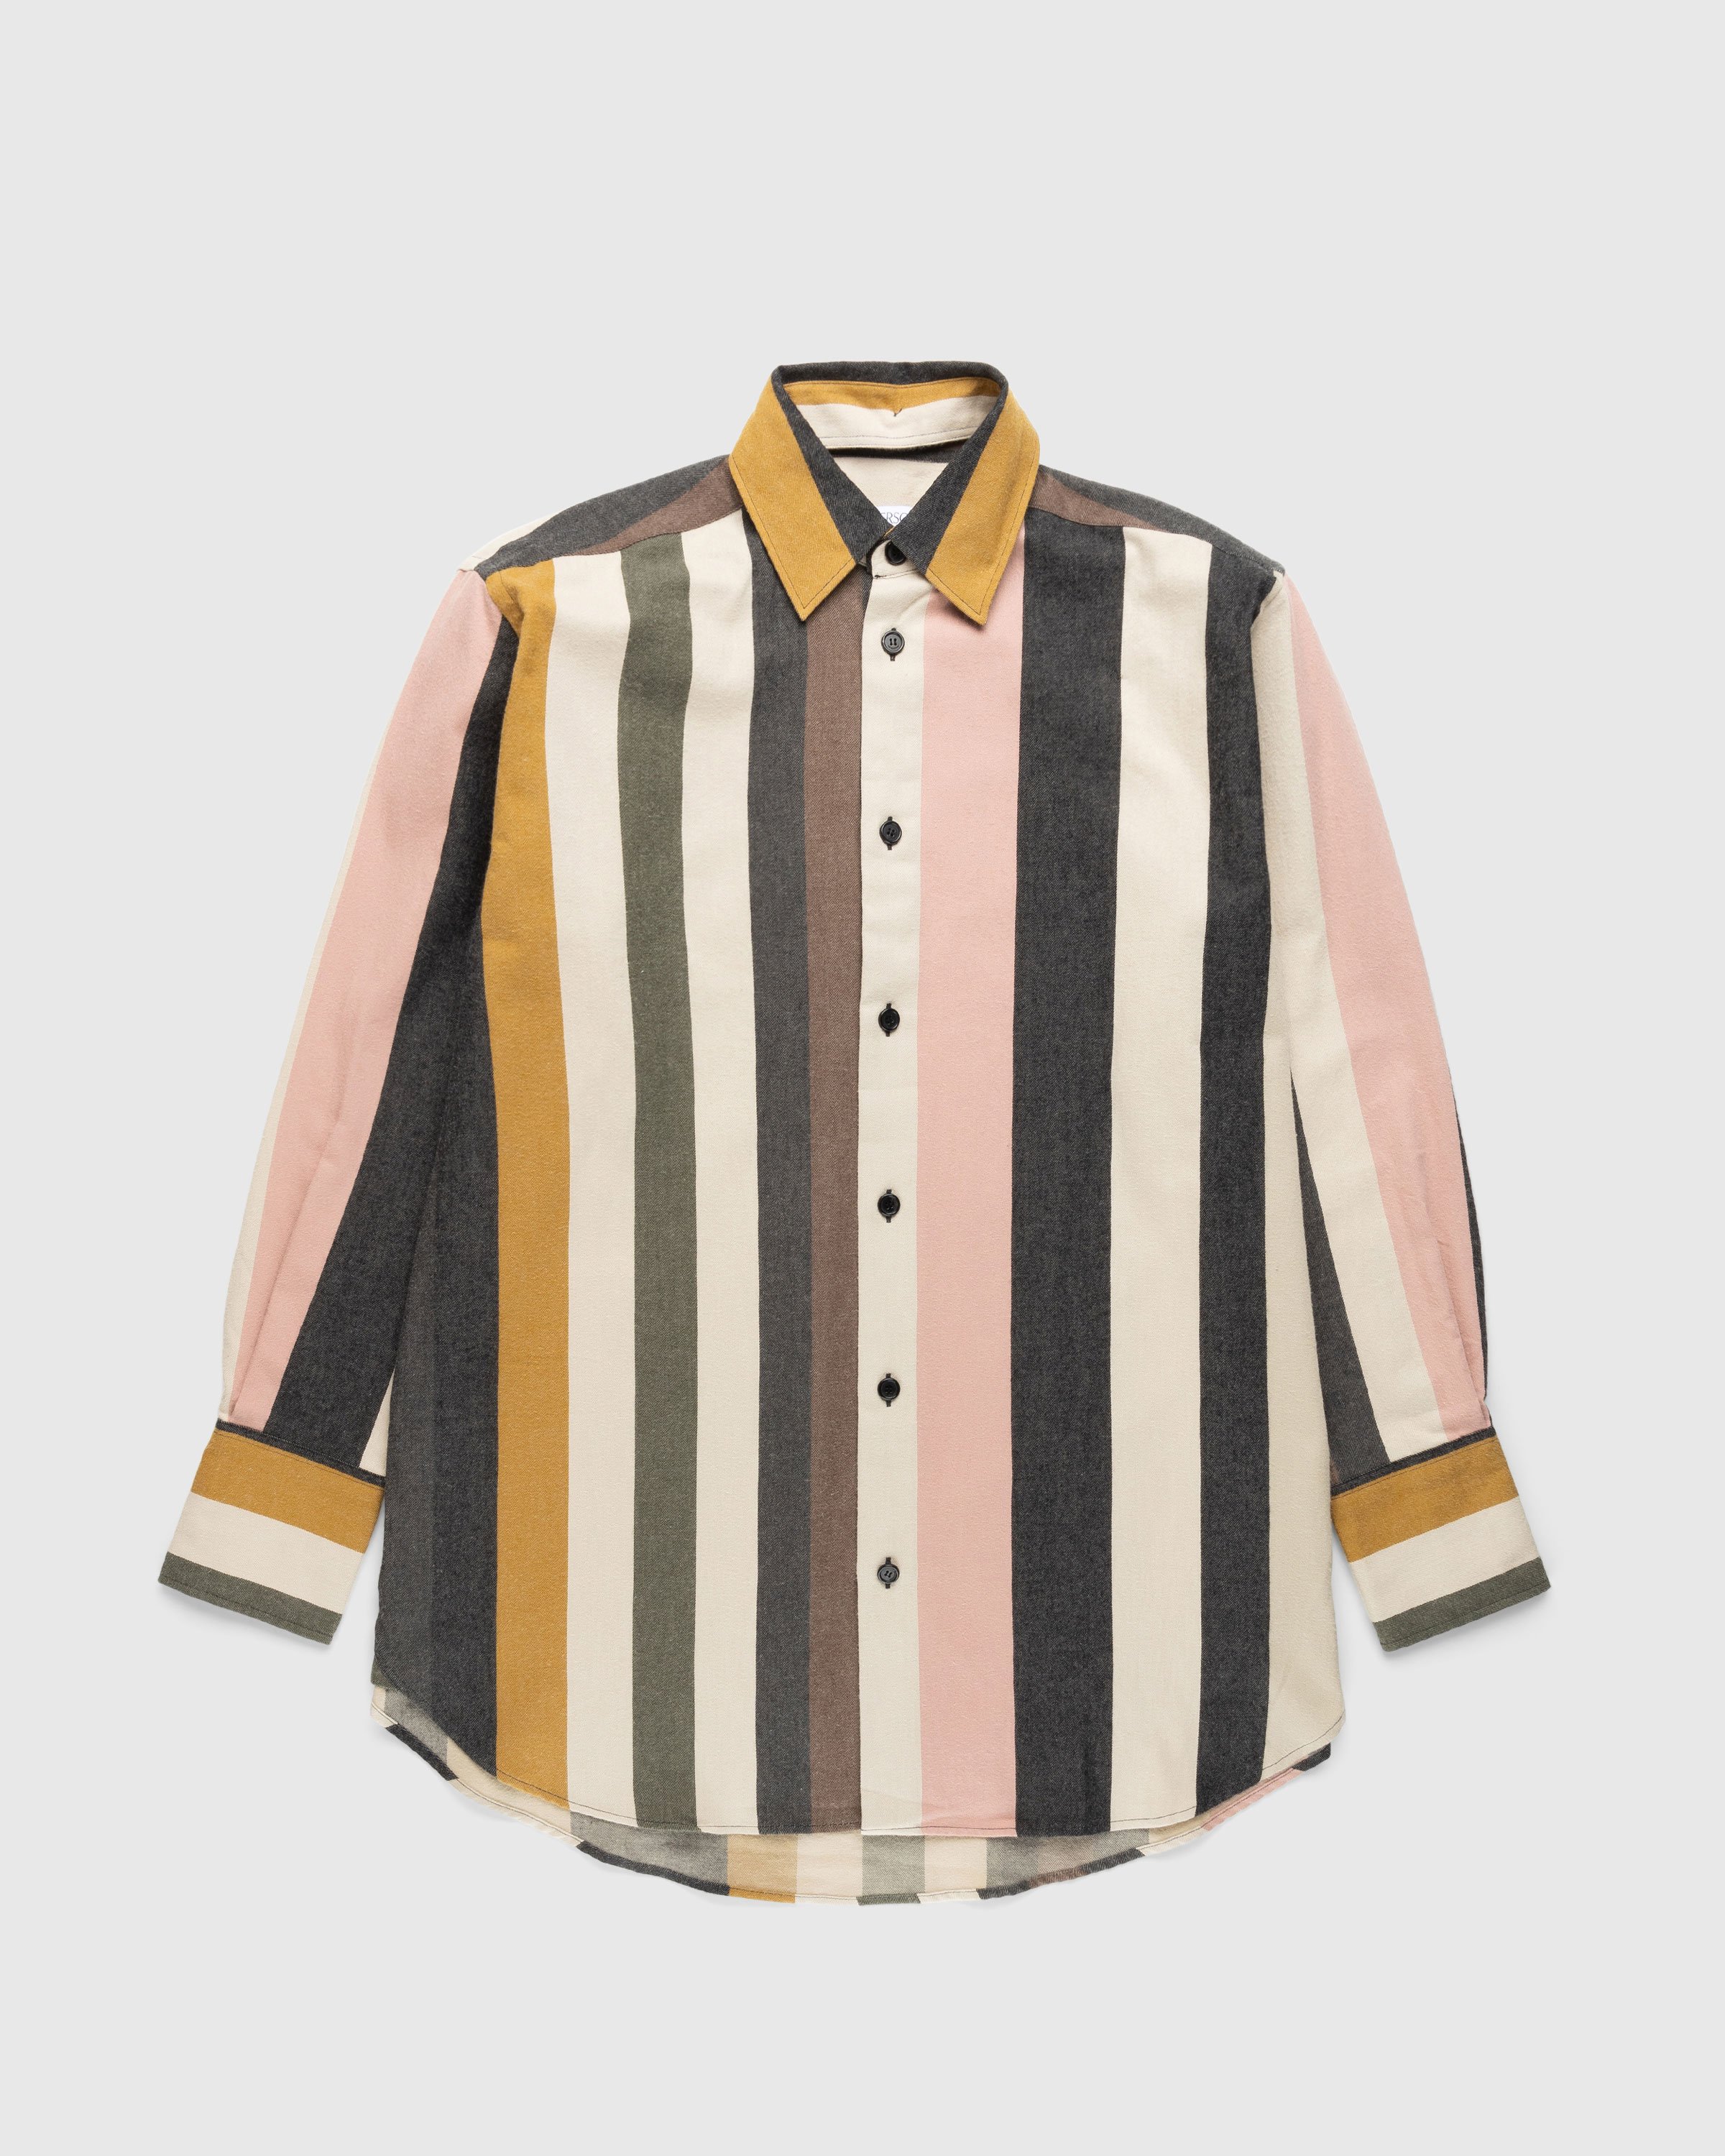 J.W. Anderson - Relaxed Fit Stripe Shirt Multi - Clothing - Multi - Image 1